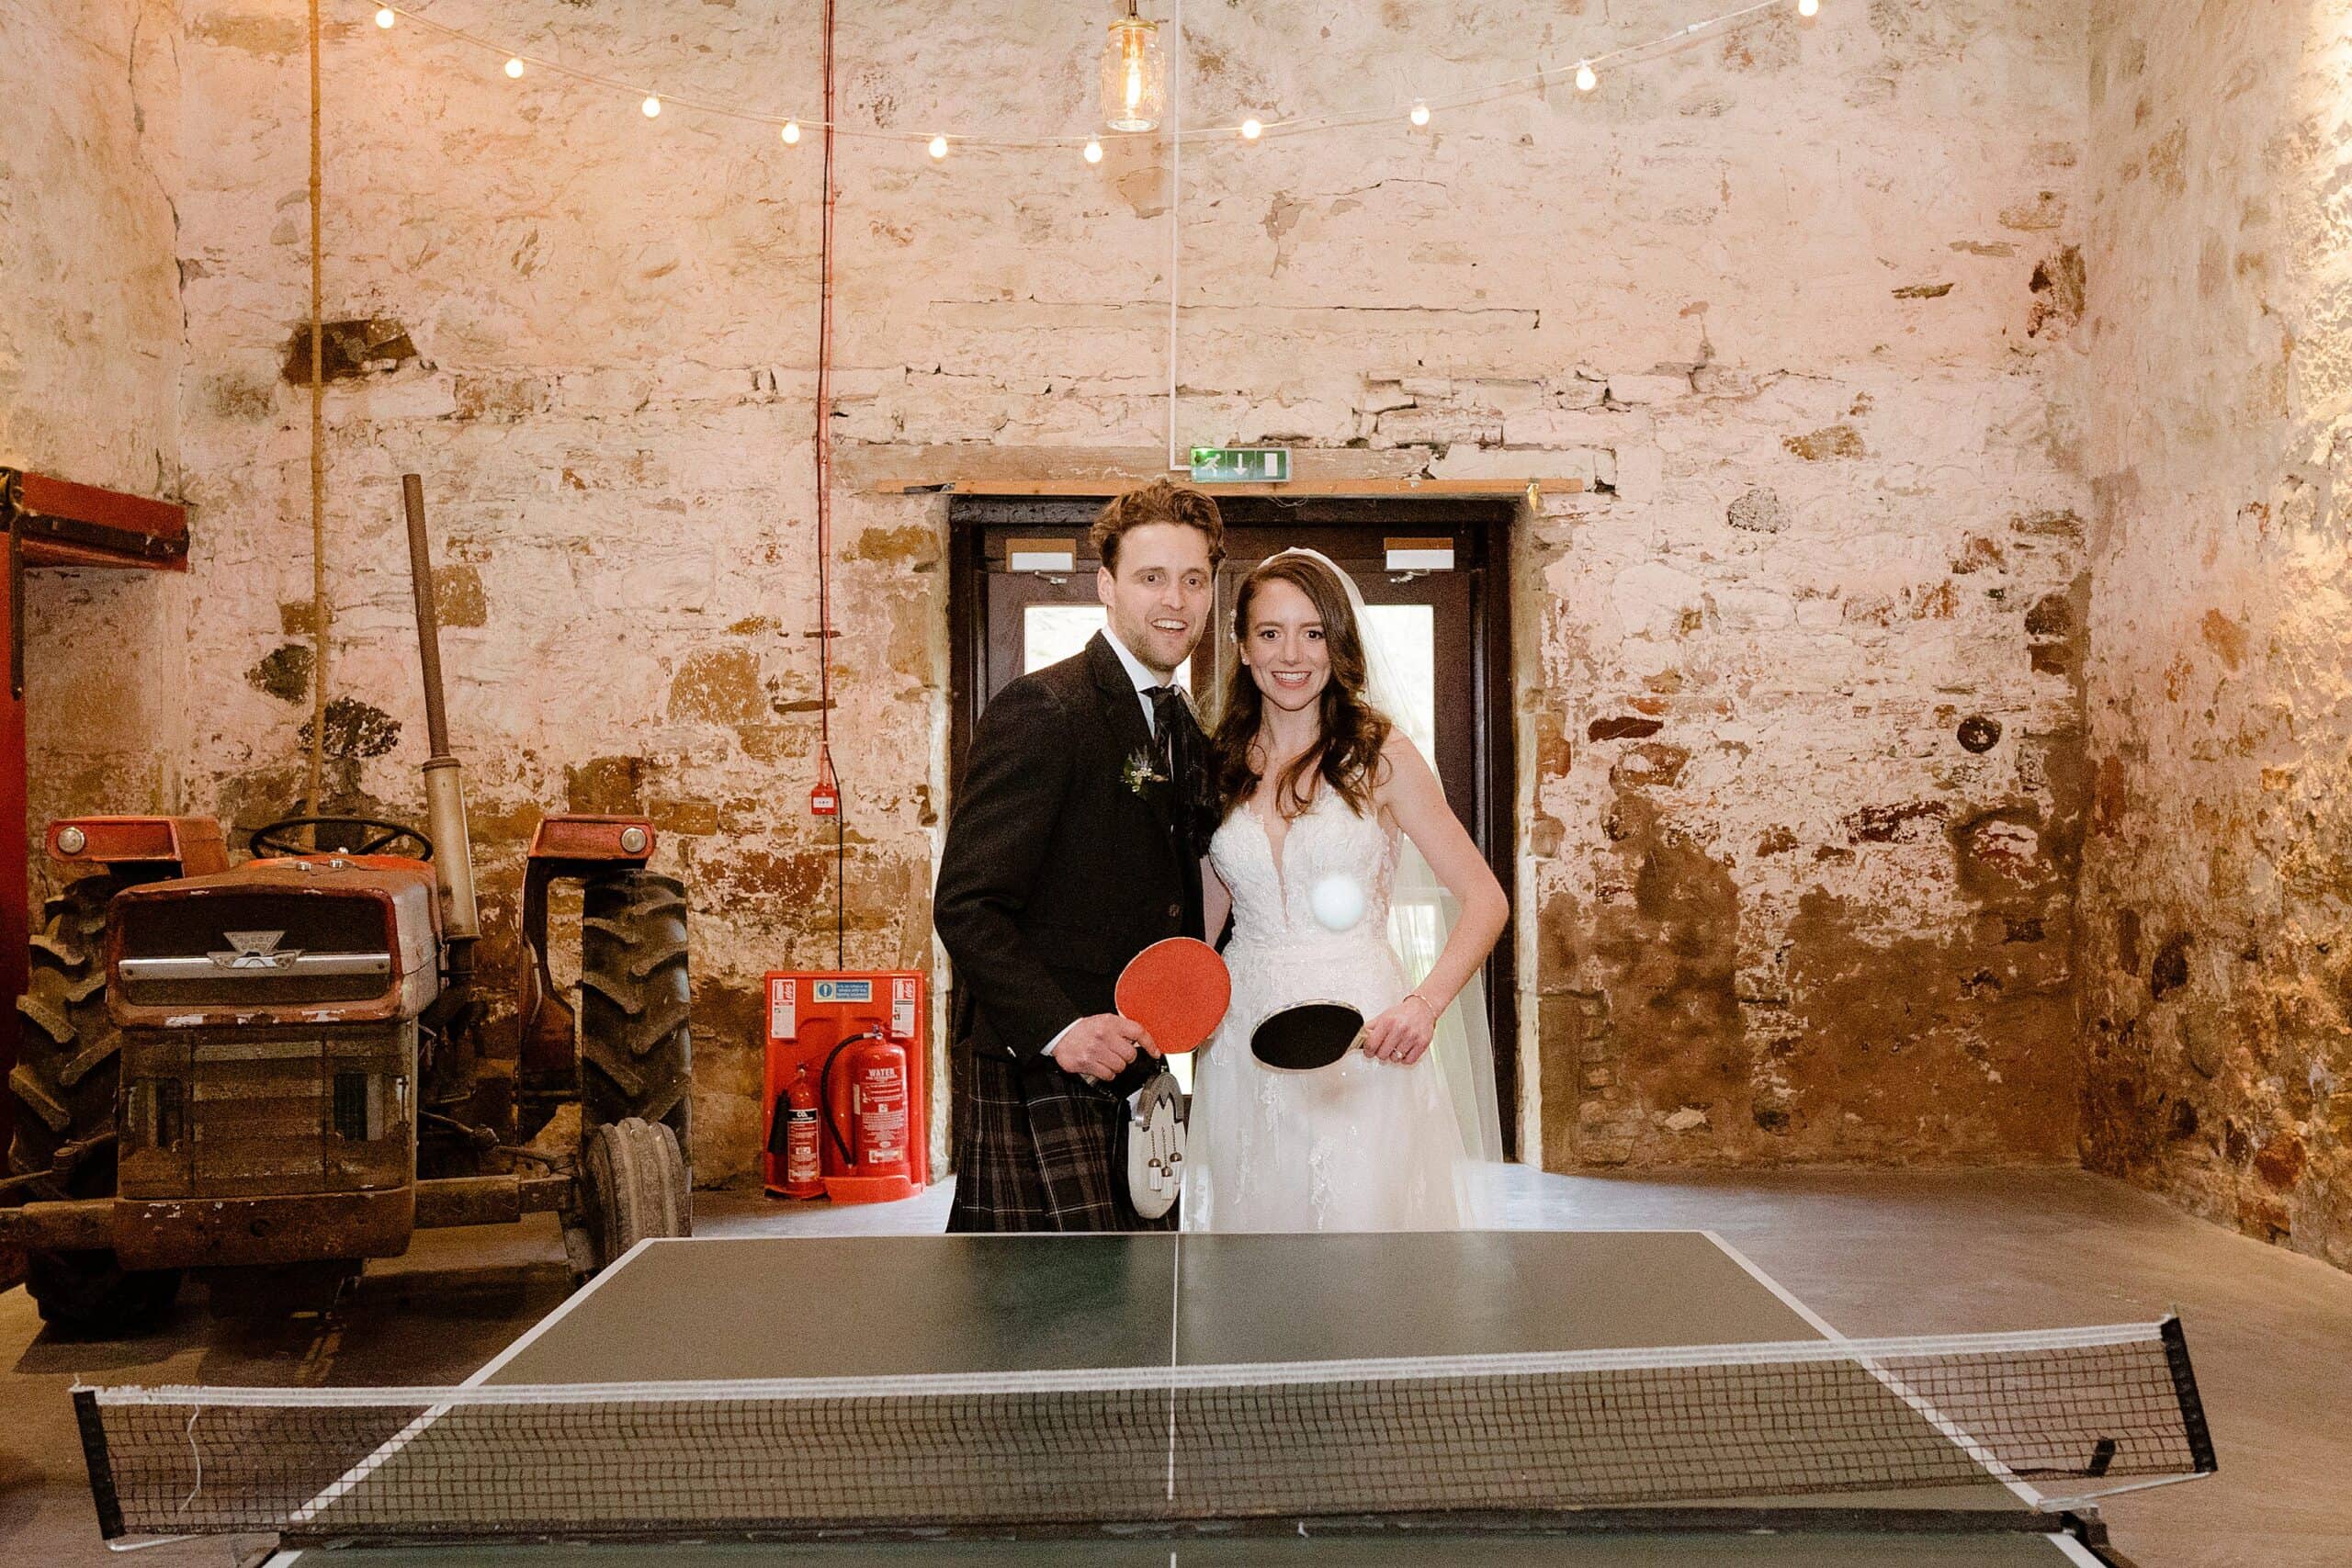 interior inside view of a unique barn wedding venue showing the bride and groom playing table tennis with festoon lights and a tractor in the background photographed by st andrews wedding photographer